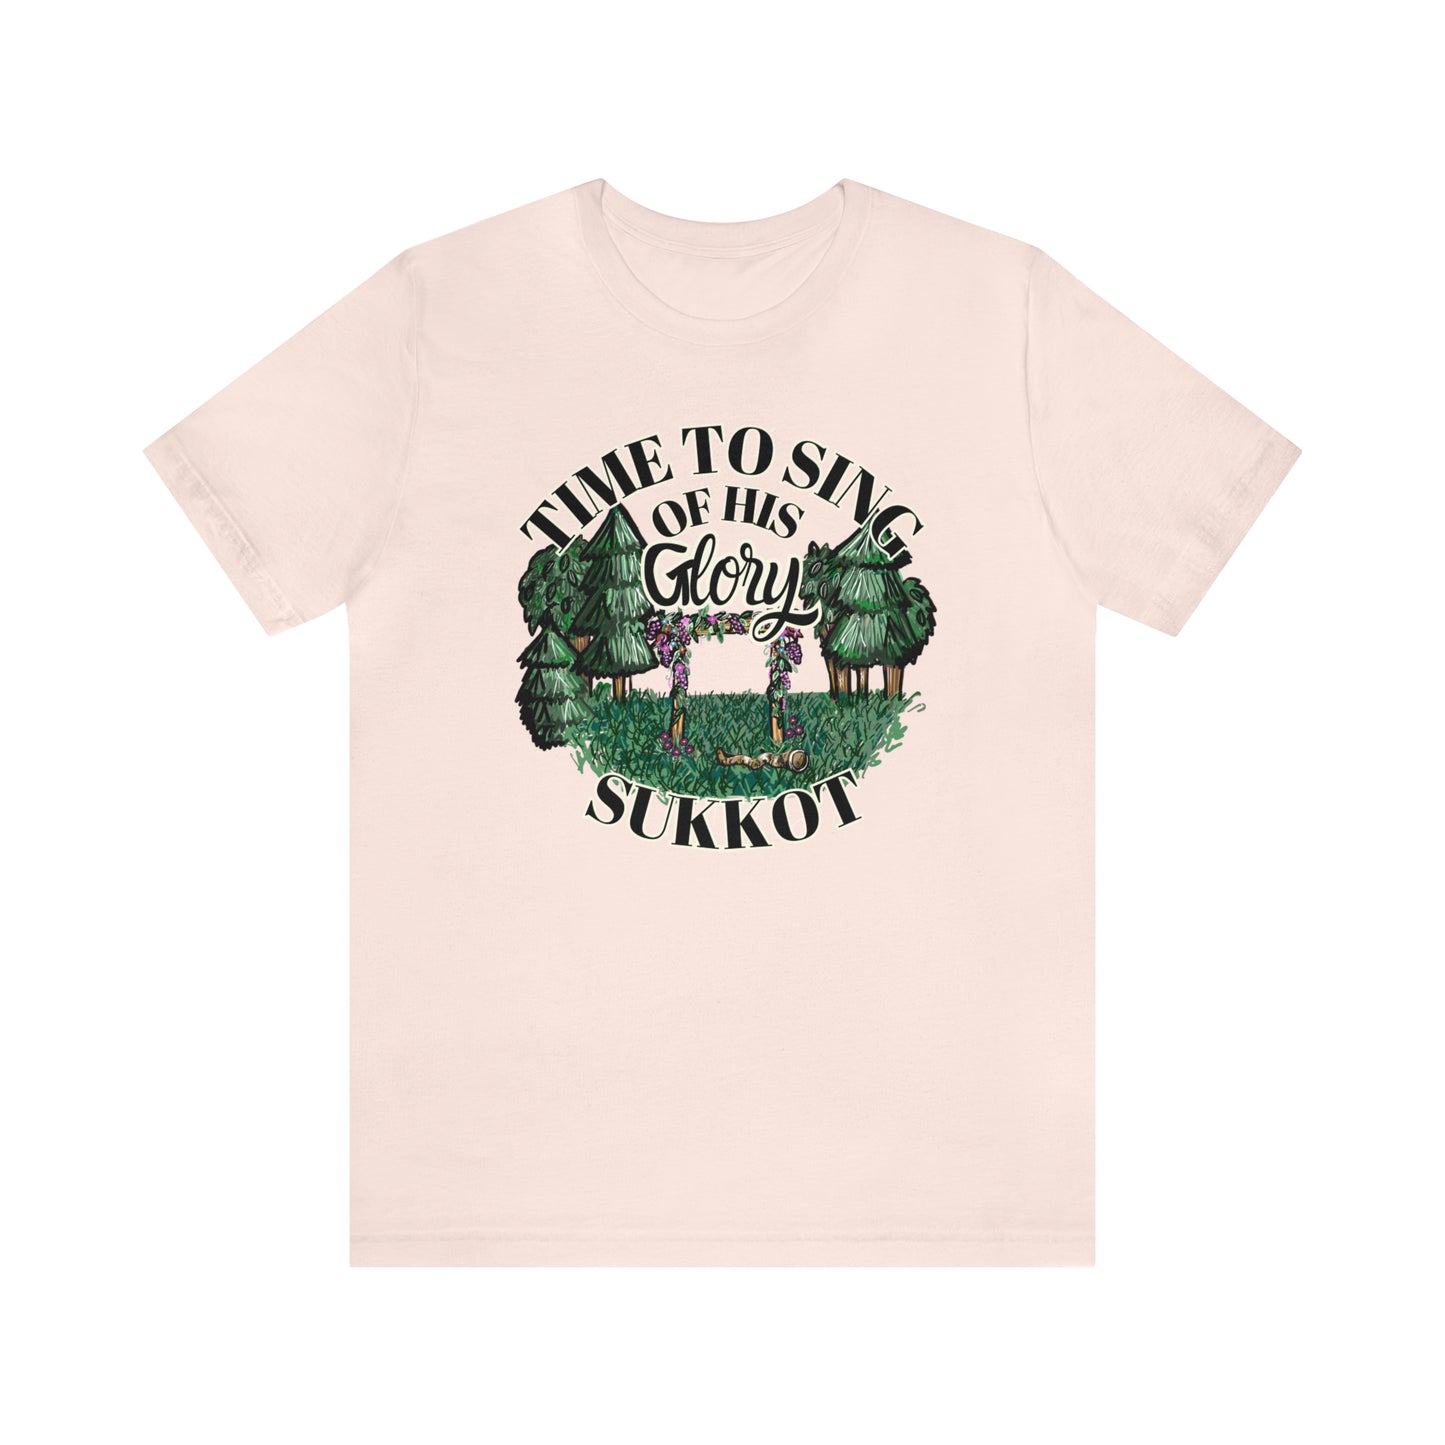 Time to Sing of His Glory Sukkah Drawing Print (Green Pastures Apparel)